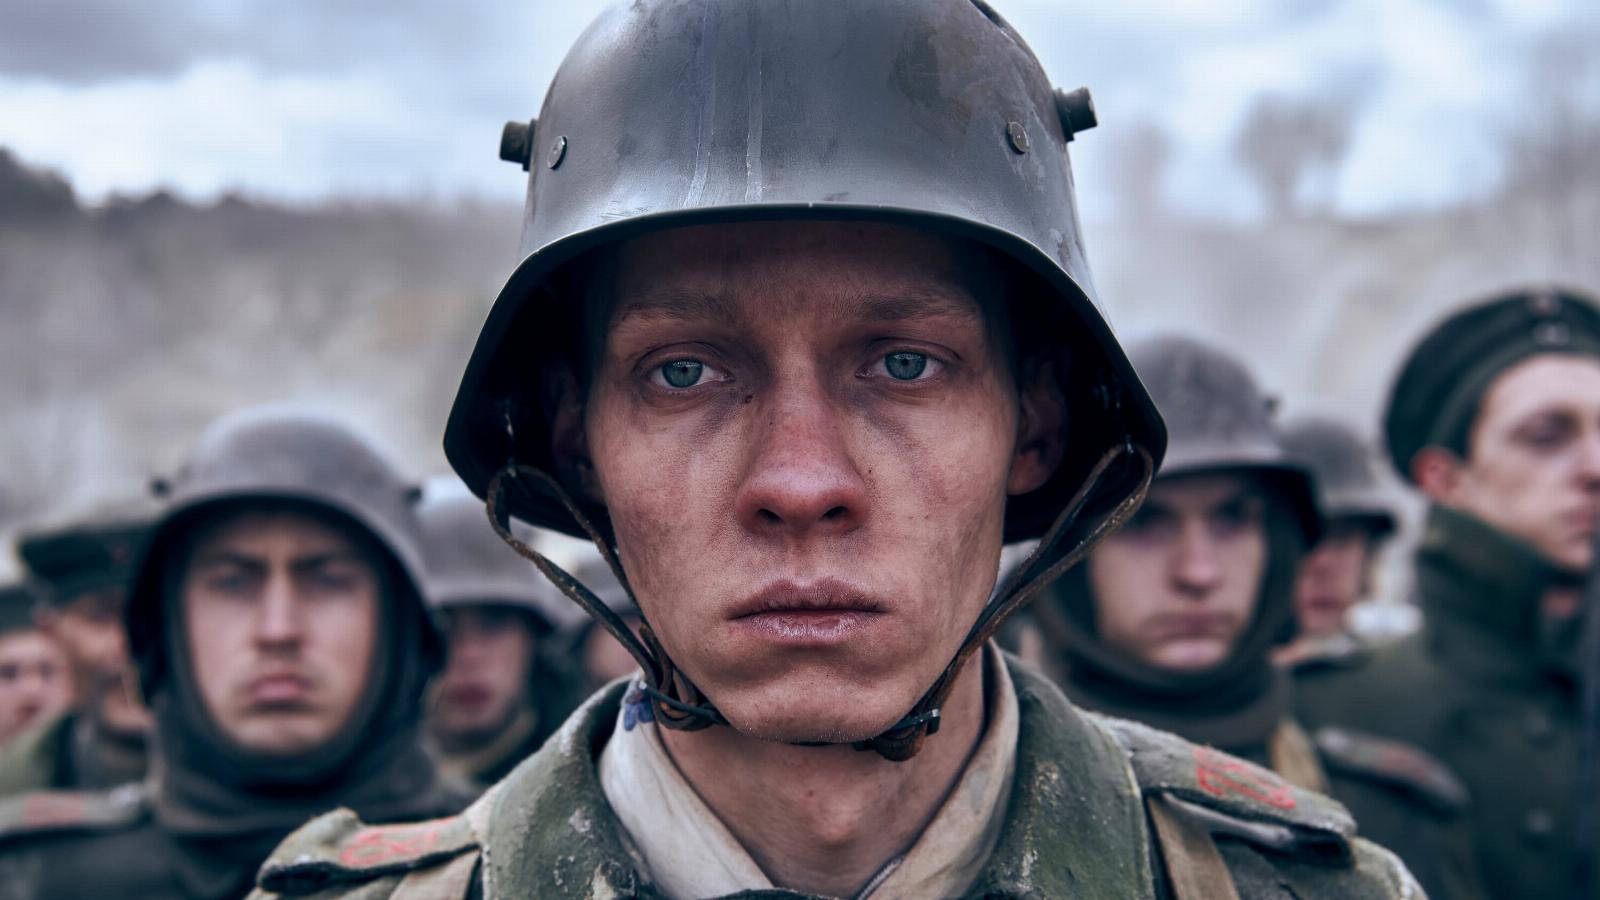 Netflix’s ‘All Quiet on the Western Front’ is among the most nominated Oscar films